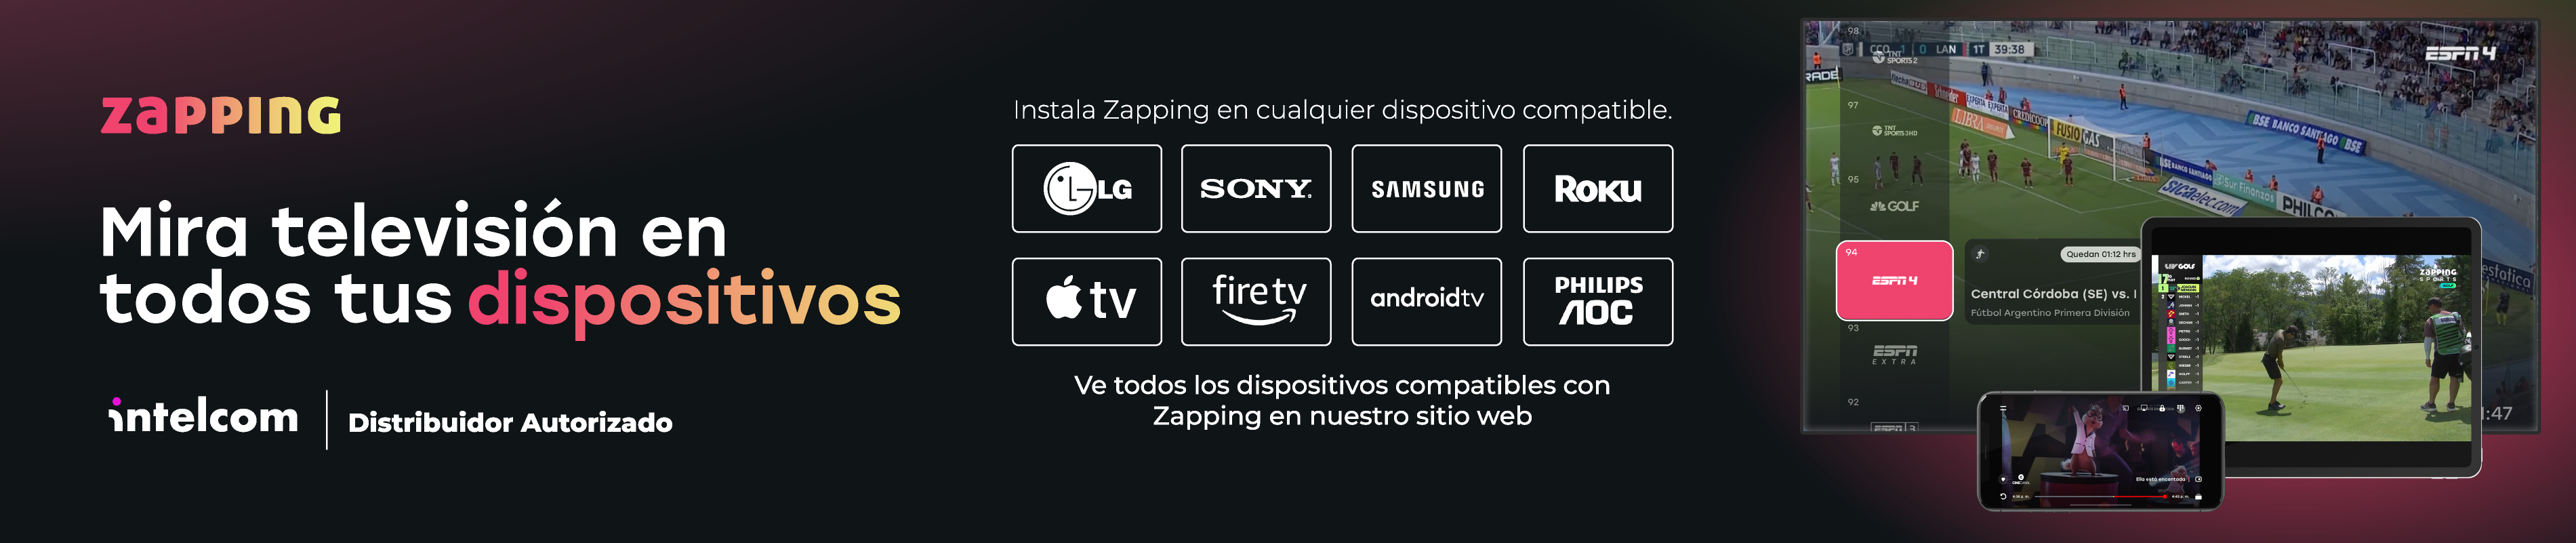 zapping3